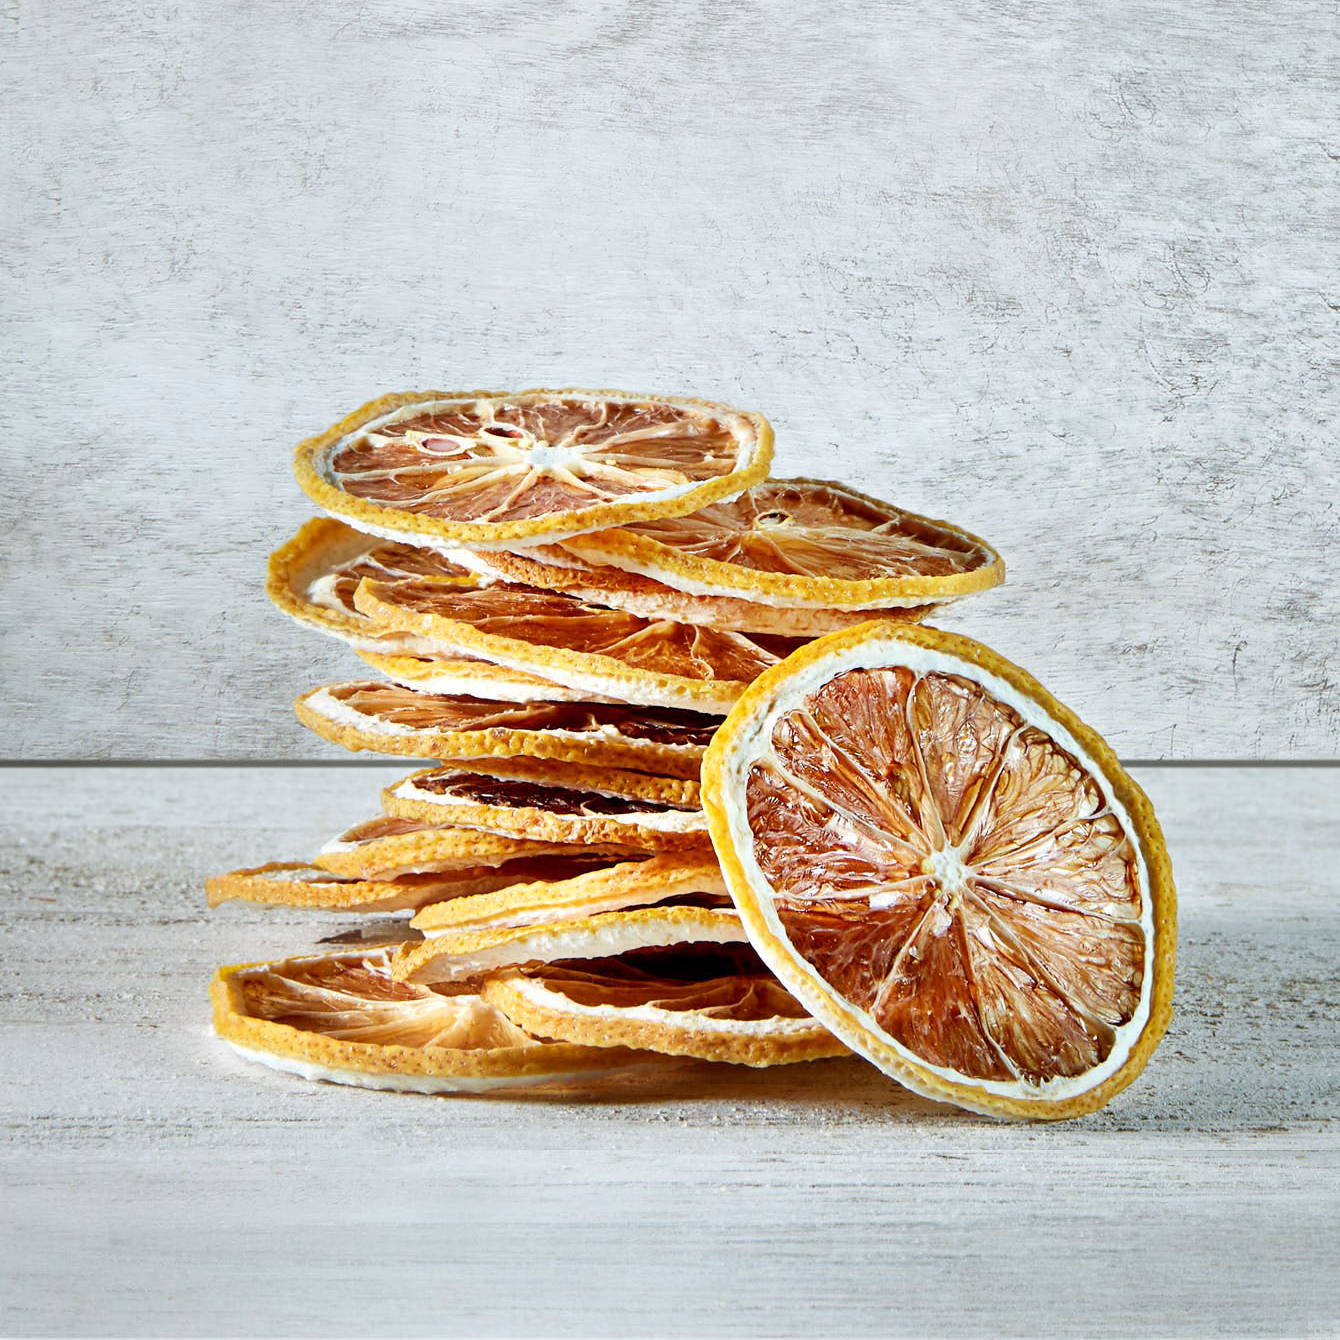 Dried Lemon Slices – Extreme Tension Wellness